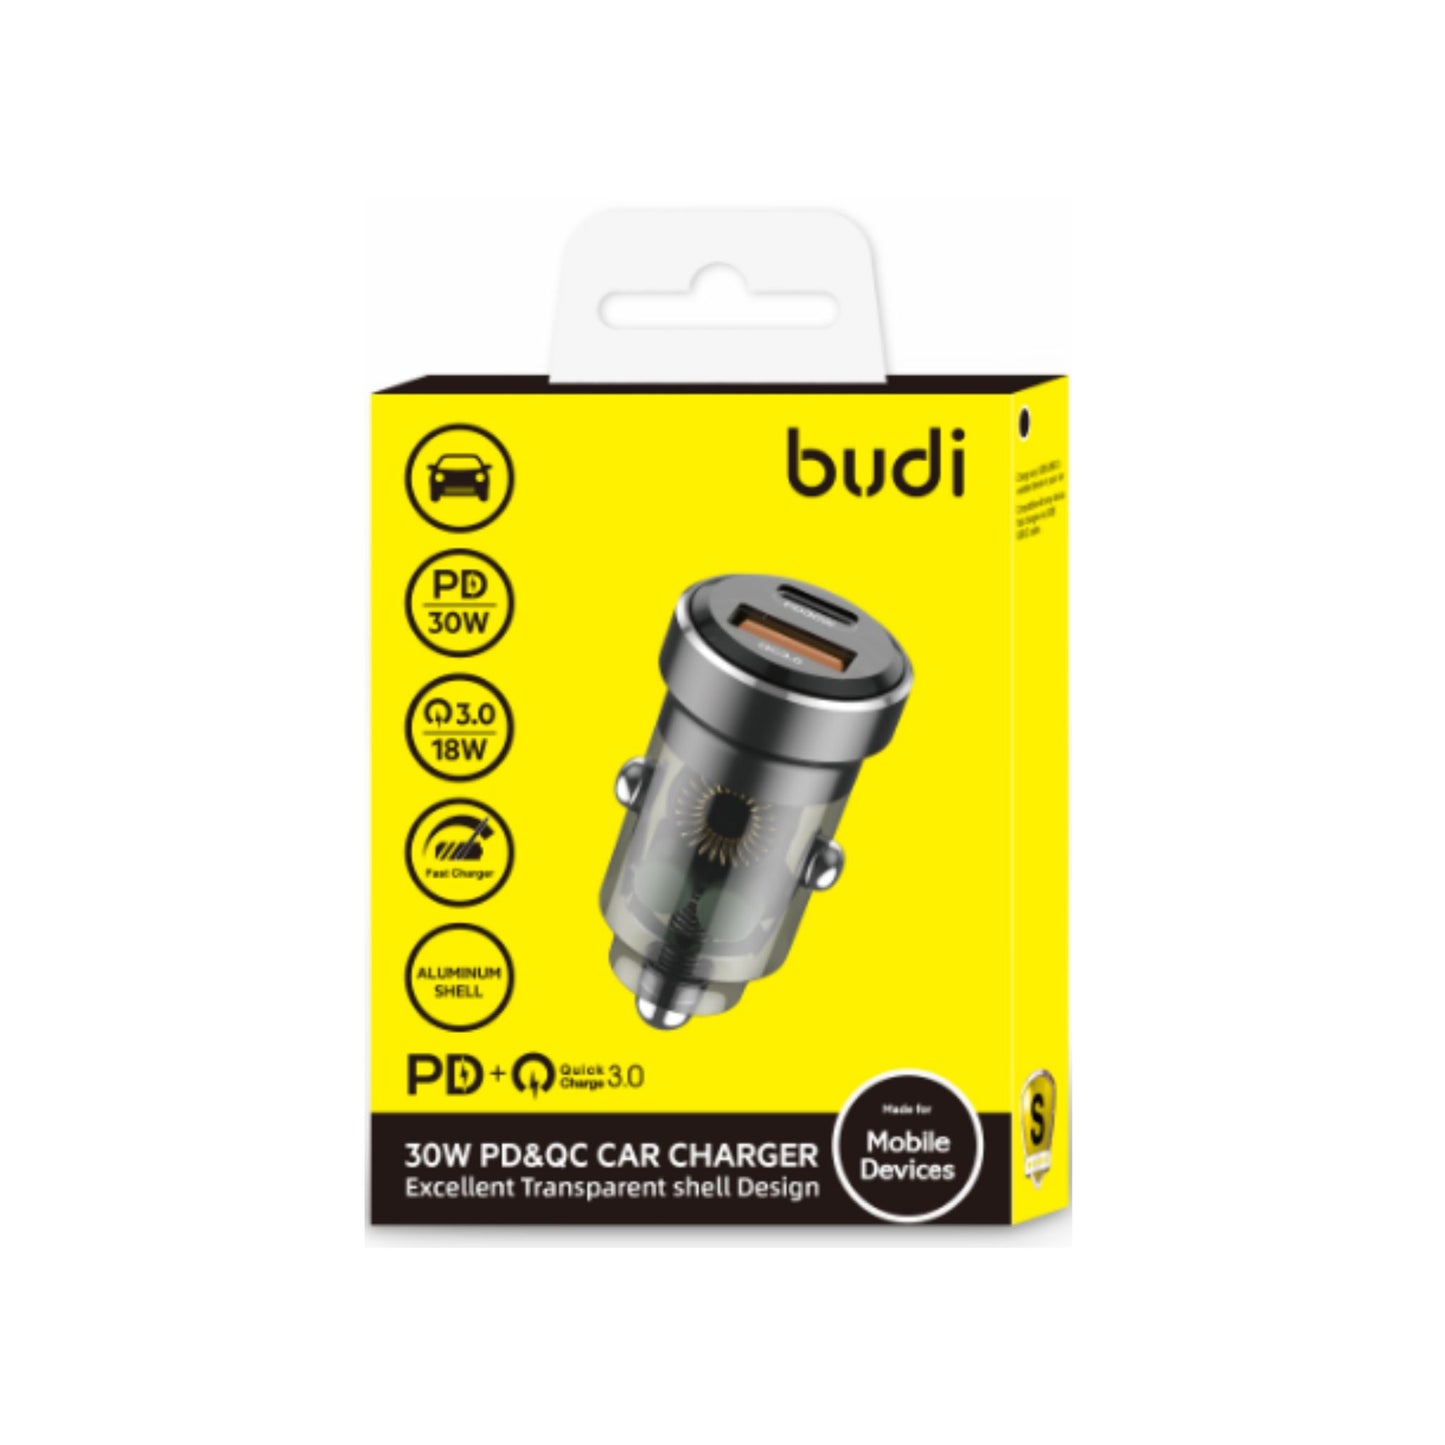 Mouse over to zoom in Budi CC633B 30W PD QC Car Charger